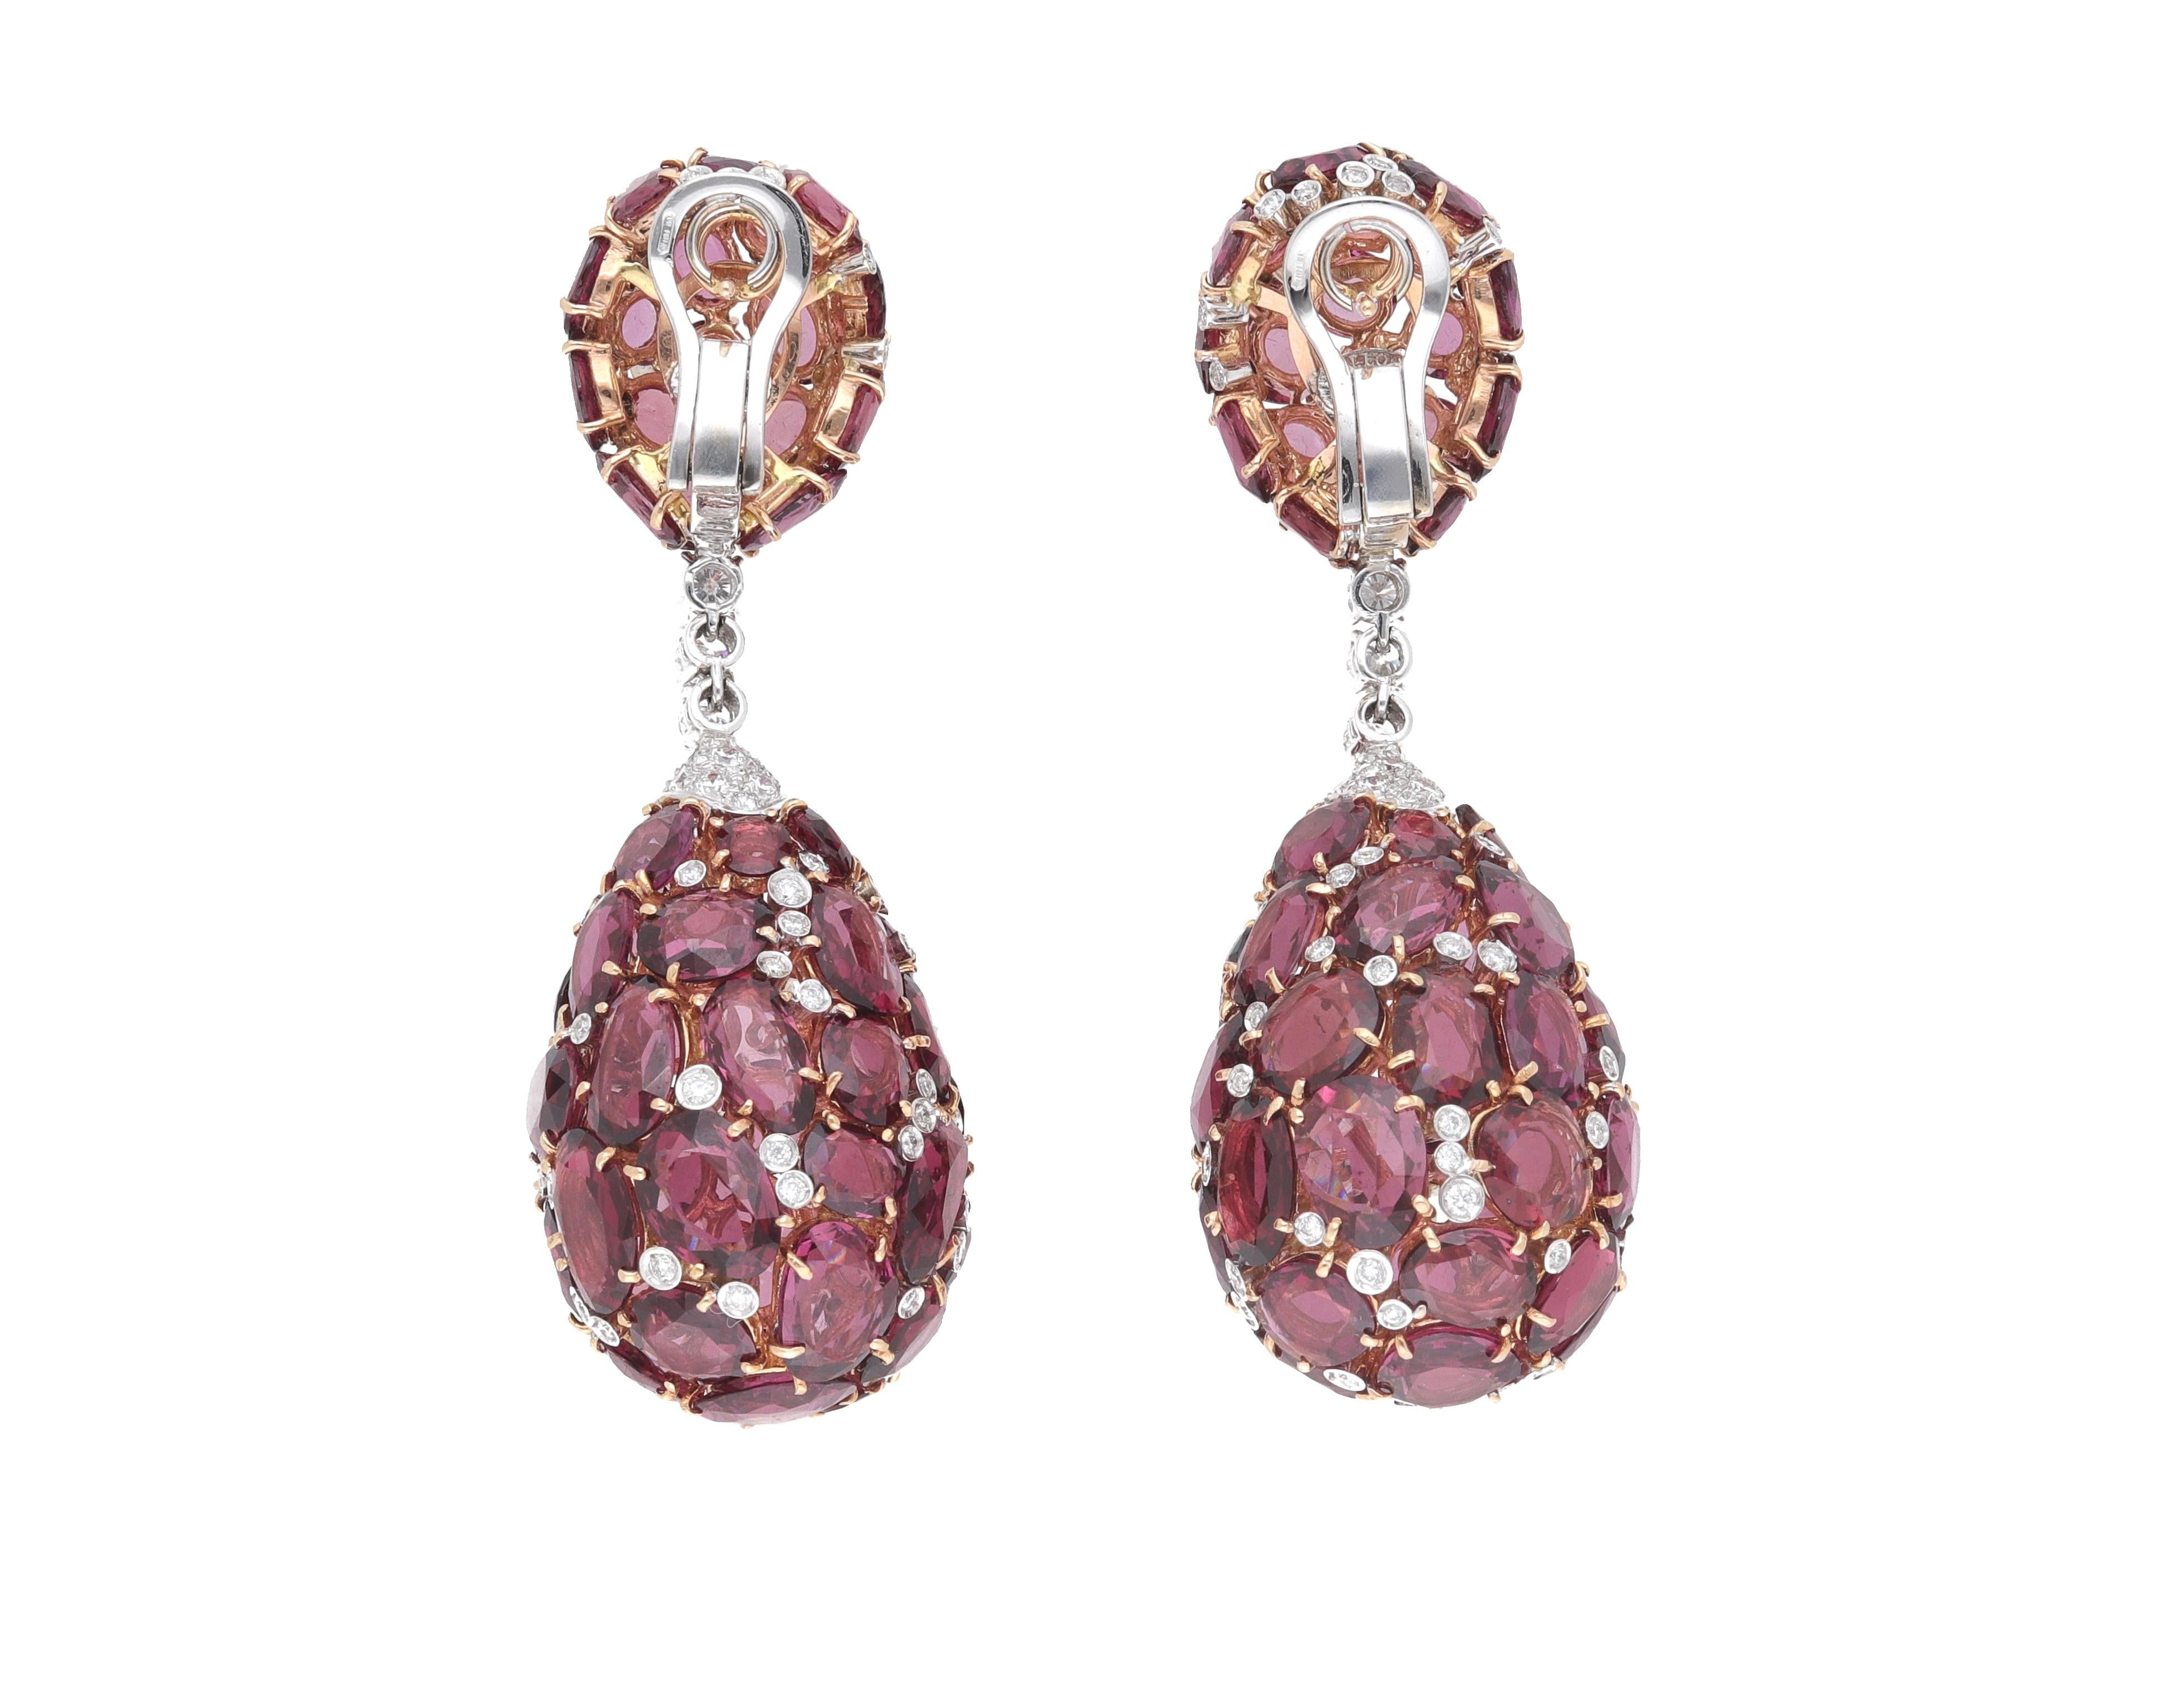 Fraleoni 18 Kt. White and Rose Gold Diamond Rodolite Pendant Earrings In New Condition For Sale In Rome, IT